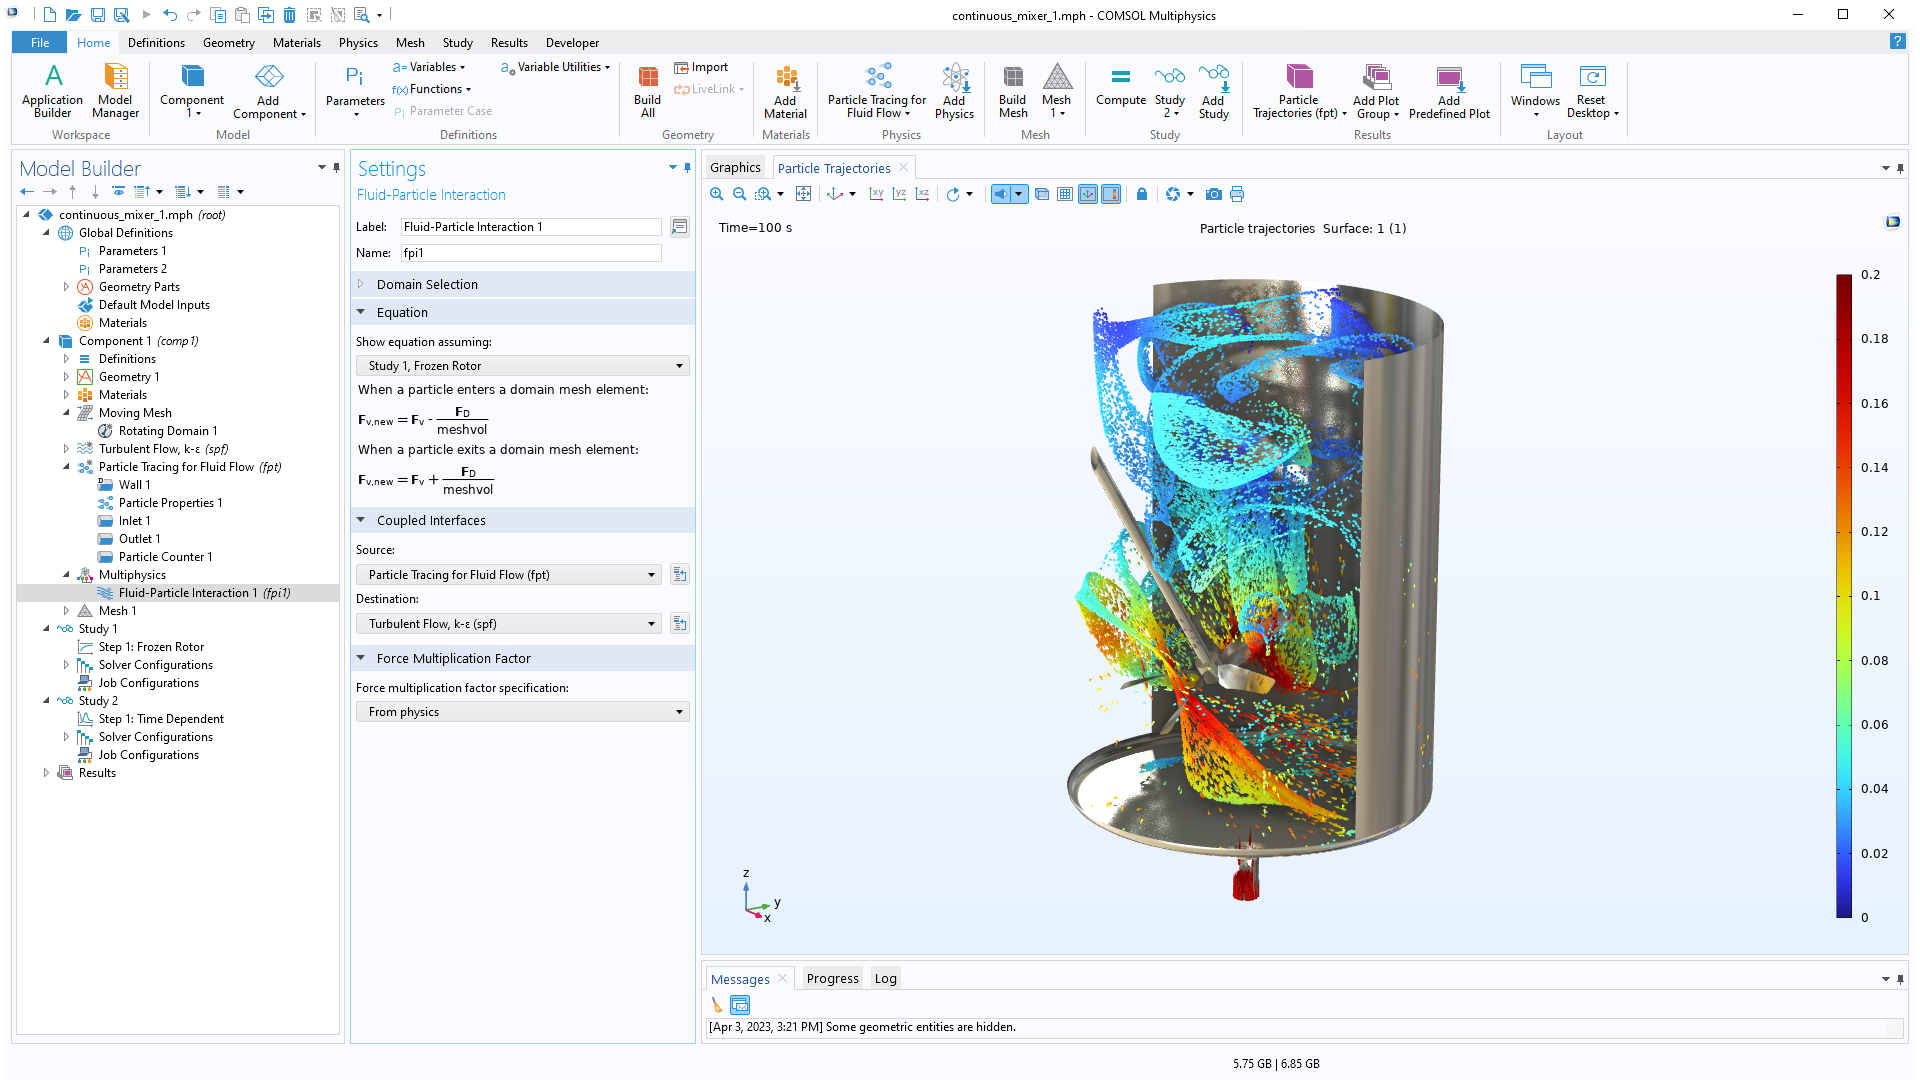 The COMSOL Multiphysics UI showing the Model Builder with the Fluid-Particle Interaction node highlighted, the corresponding Settings window, and a mixer model in the Graphics window.